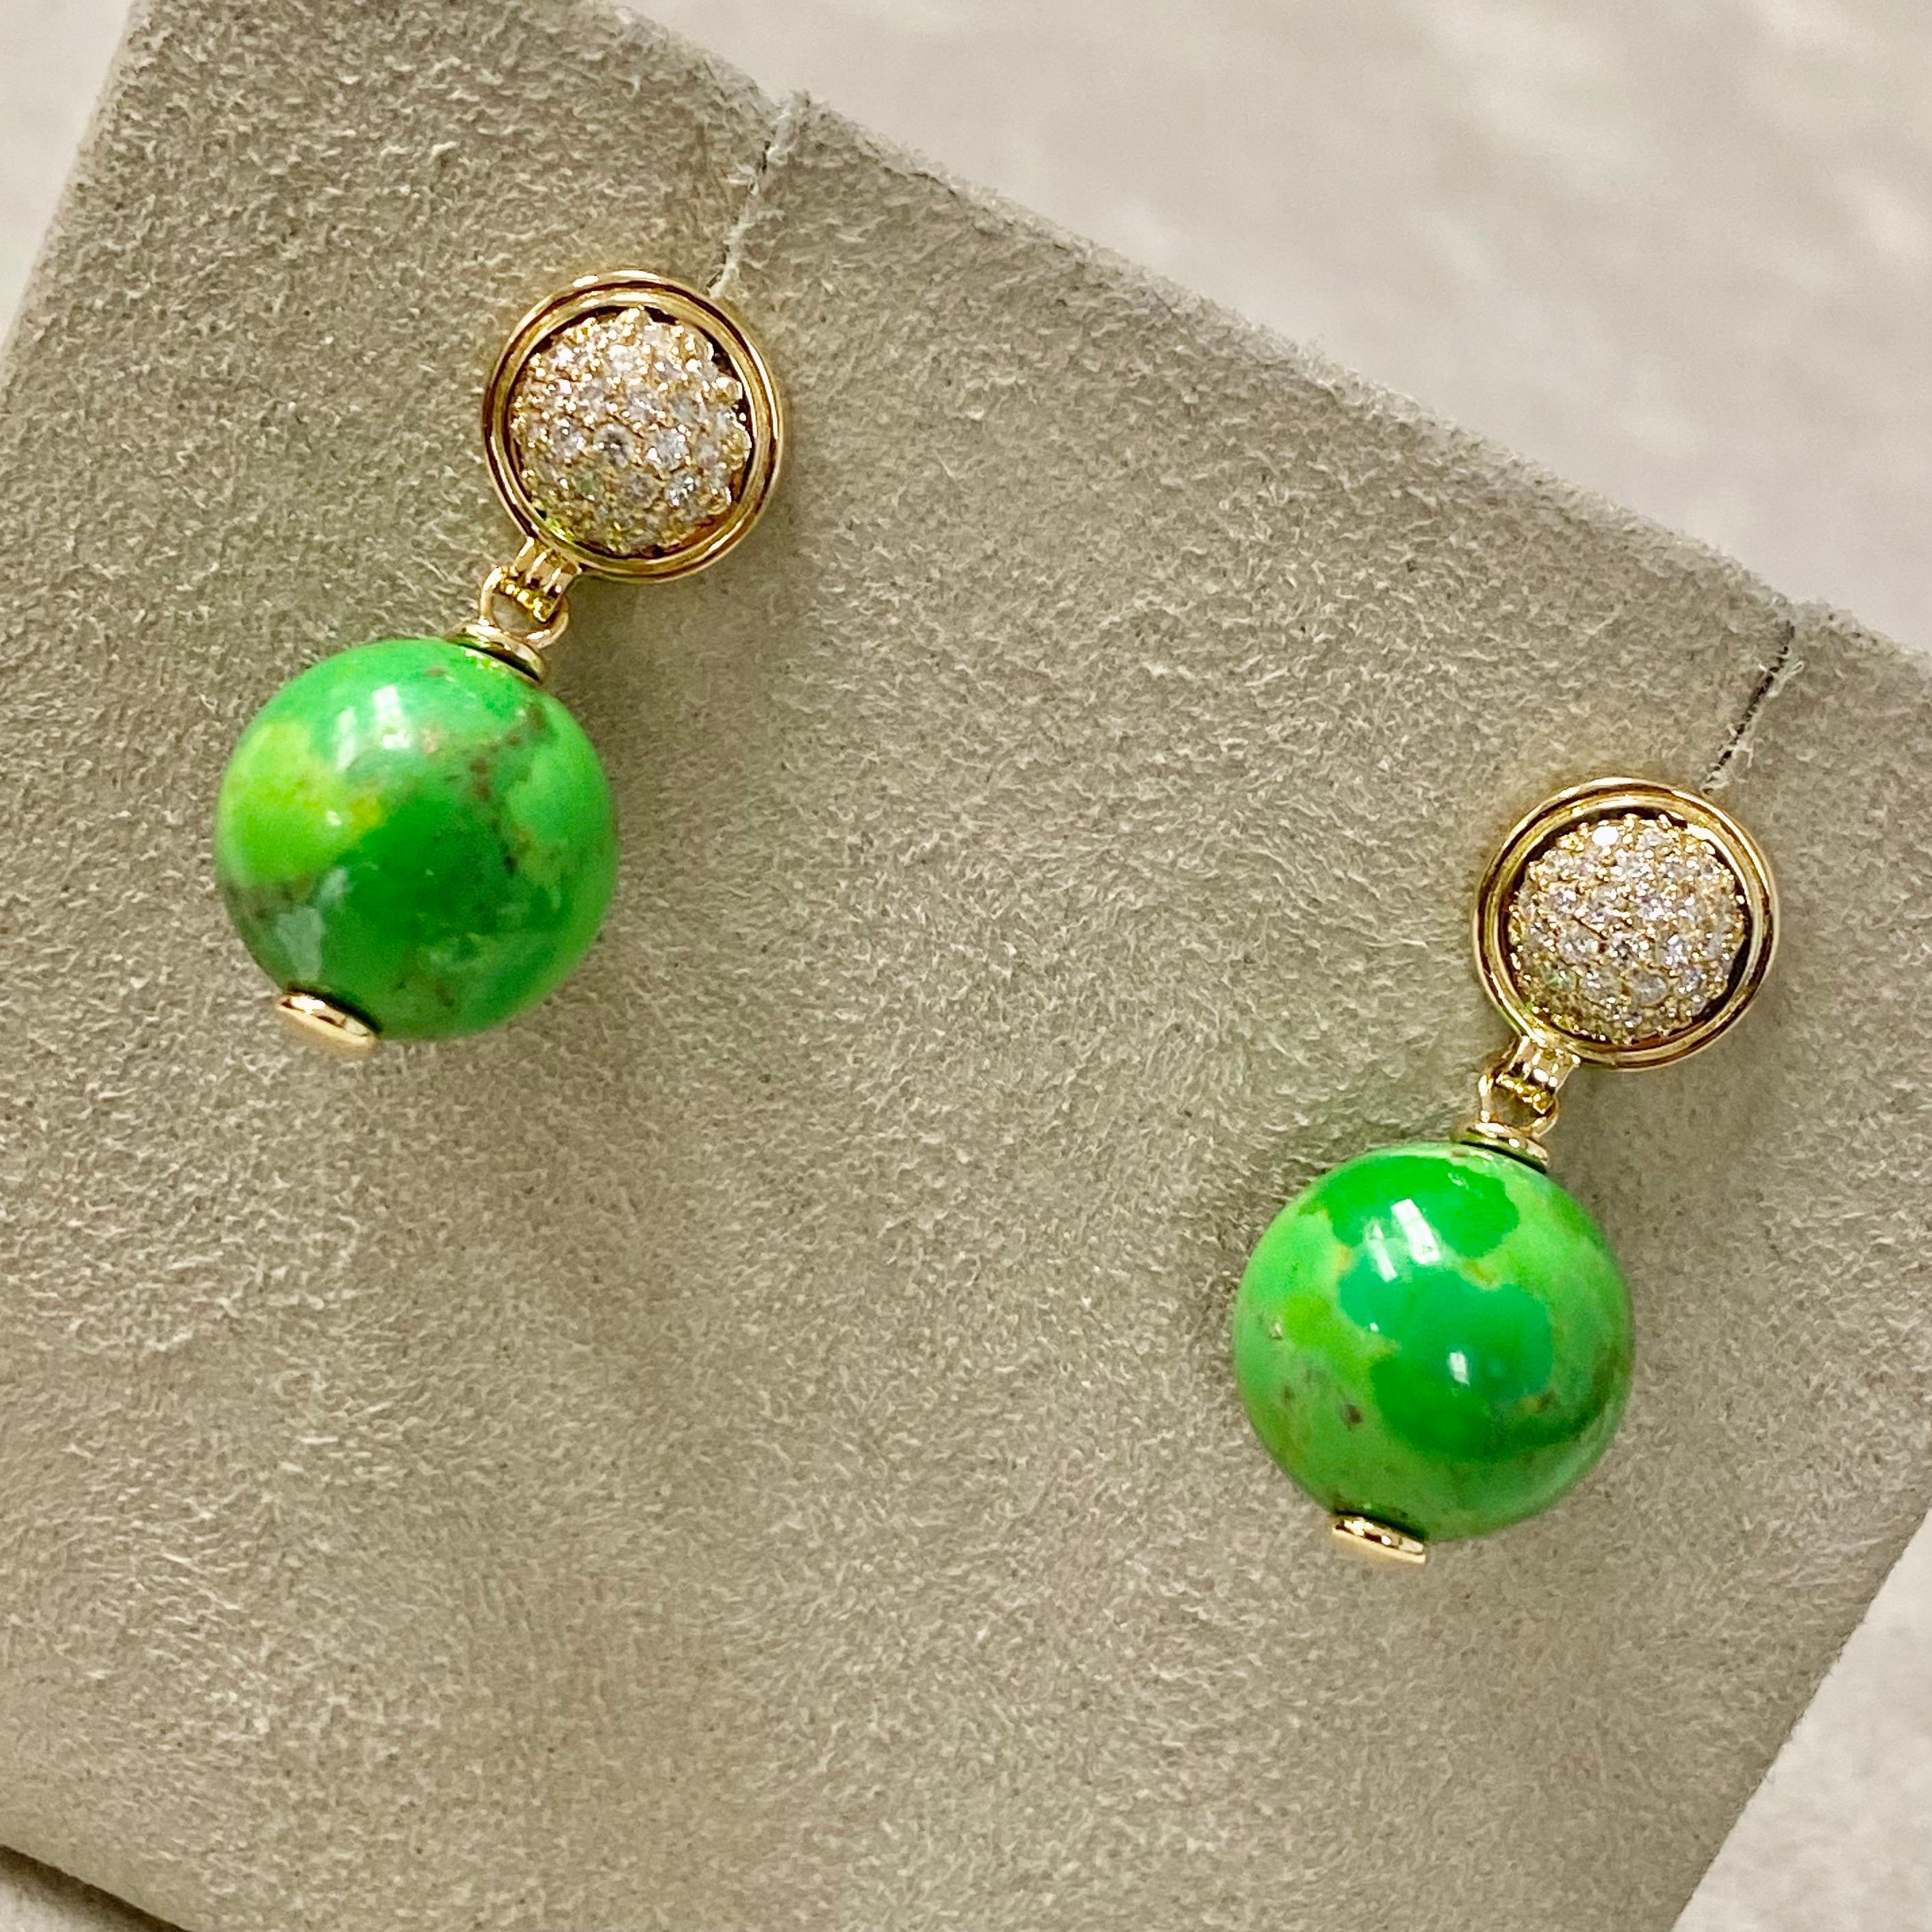 Created in 18 karat yellow gold
Green Turquoise 21 carats approx.
Diamonds 0.4 carat approx.
18kyg butterfly backs
Limited edition

Exquisitely crafted in 18 karat yellow gold, these limited-edition earrings are graced with striking green turquoise